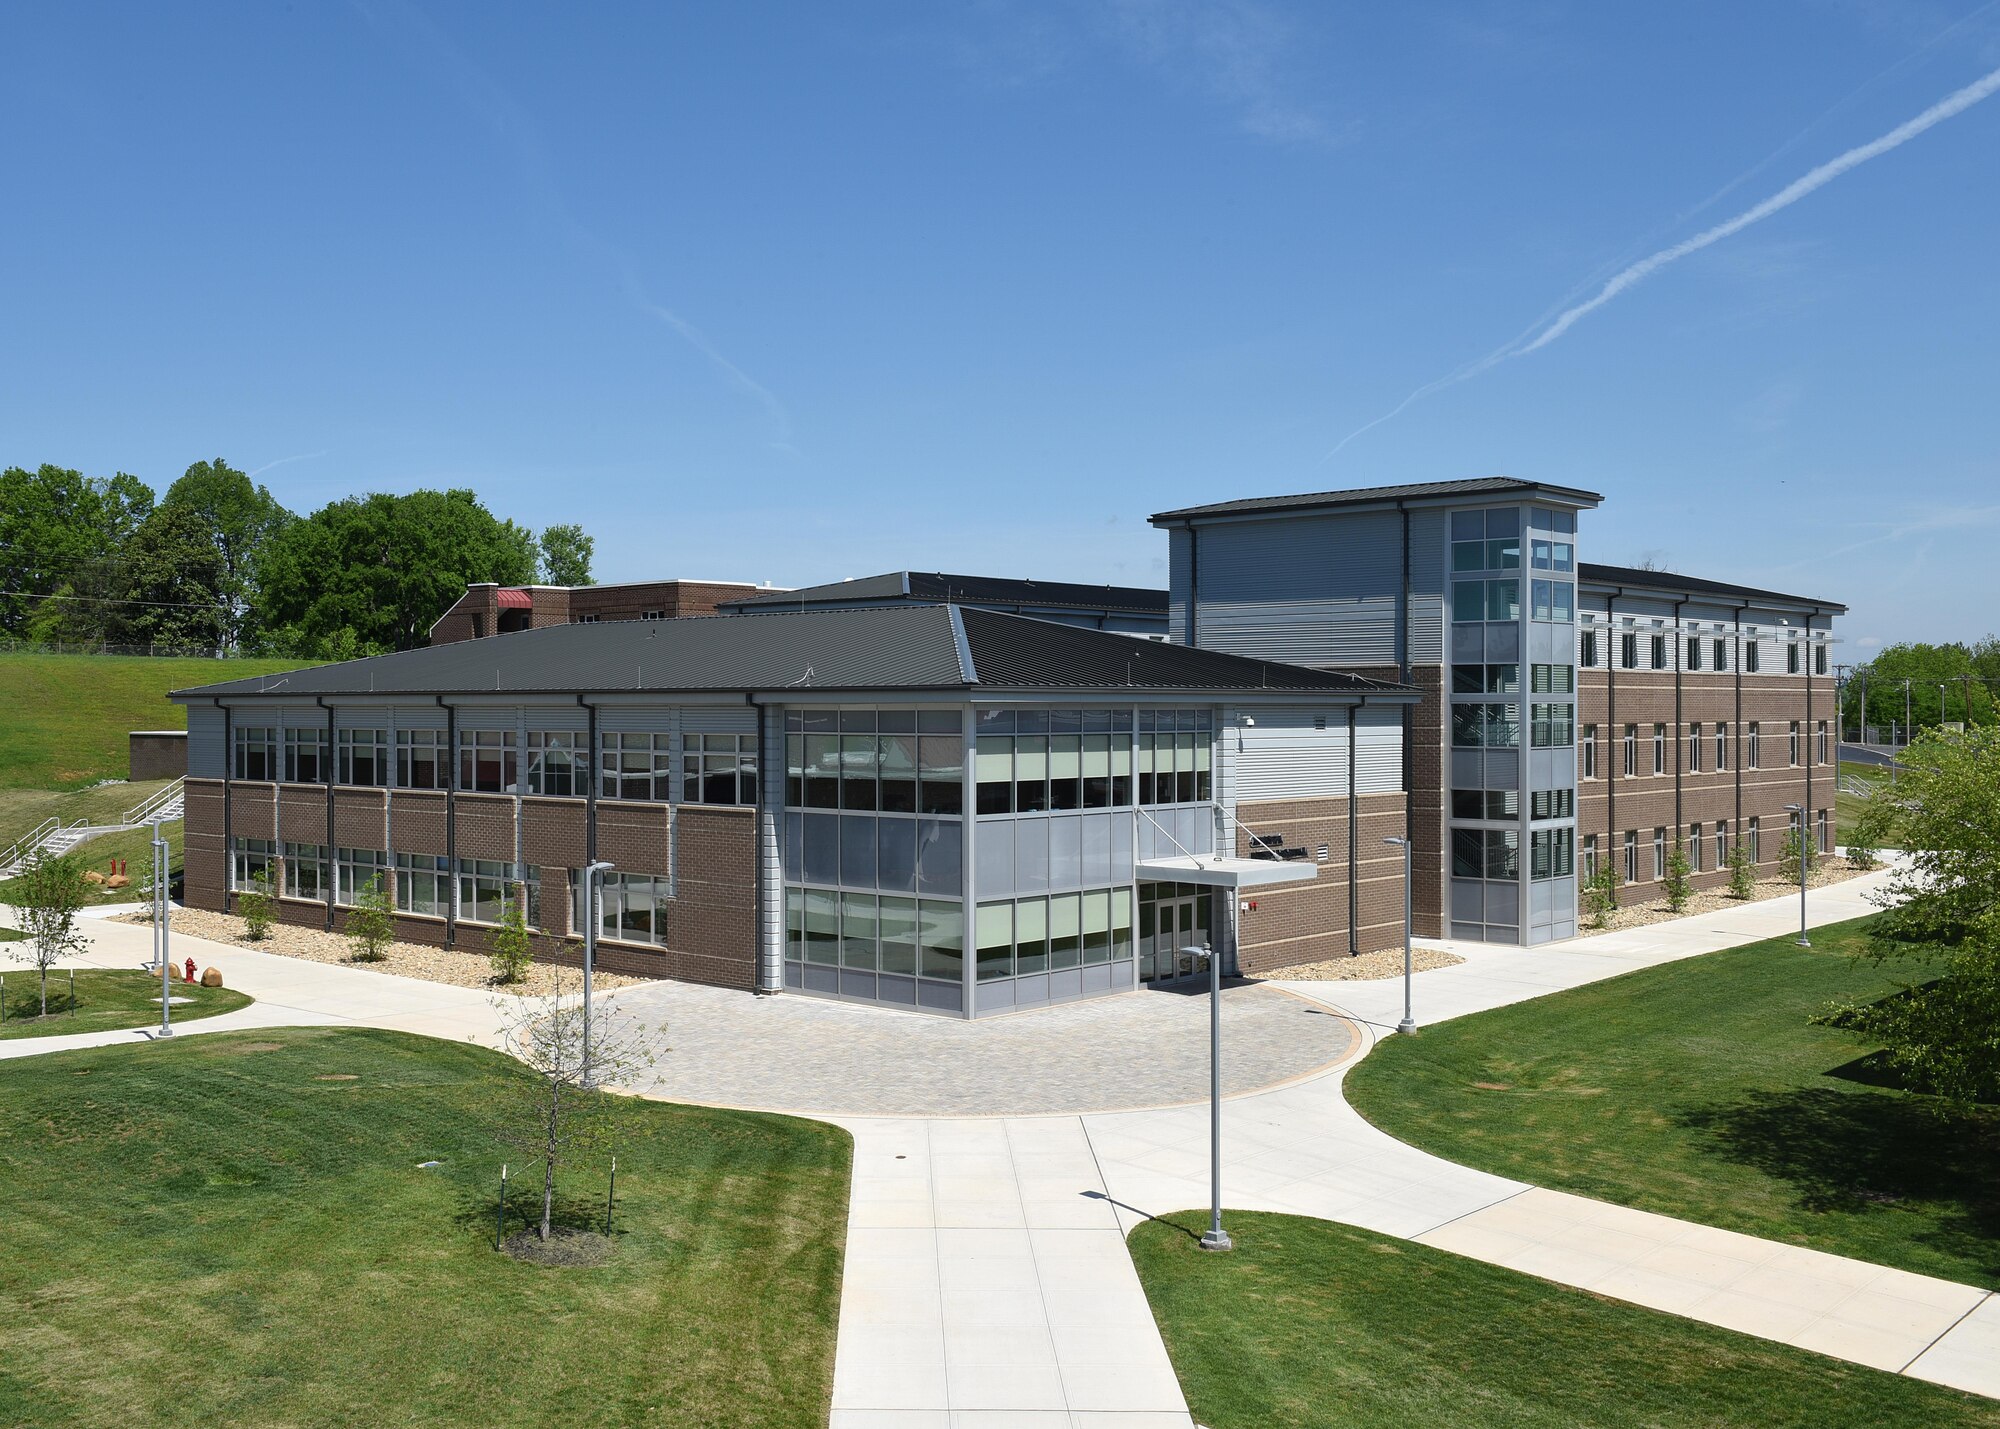 The Air National Guard's I.G. Brown Training and Education Center mixed-use facility, Buildings 418, 414A-B, scheduled to be named Craig R. McKinley Hall, is a 46,871 square foot classroom and dormitory facility for training and education at McGhee Tyson Air National Guard Base in east Tennessee. The facility was constructed from August 2014 to January 2017. Gen. Craig R. McKinley is the 26th Chief of the National Guard Bureau, its first four-star general and member of the Joint Chiefs of Staff. He is a U.S. Air Force Order of the Sword awardee; the highest honor bestowed by the enlisted force. (U.S. Air National Guard photo by Master Sgt. Mike R. Smith)